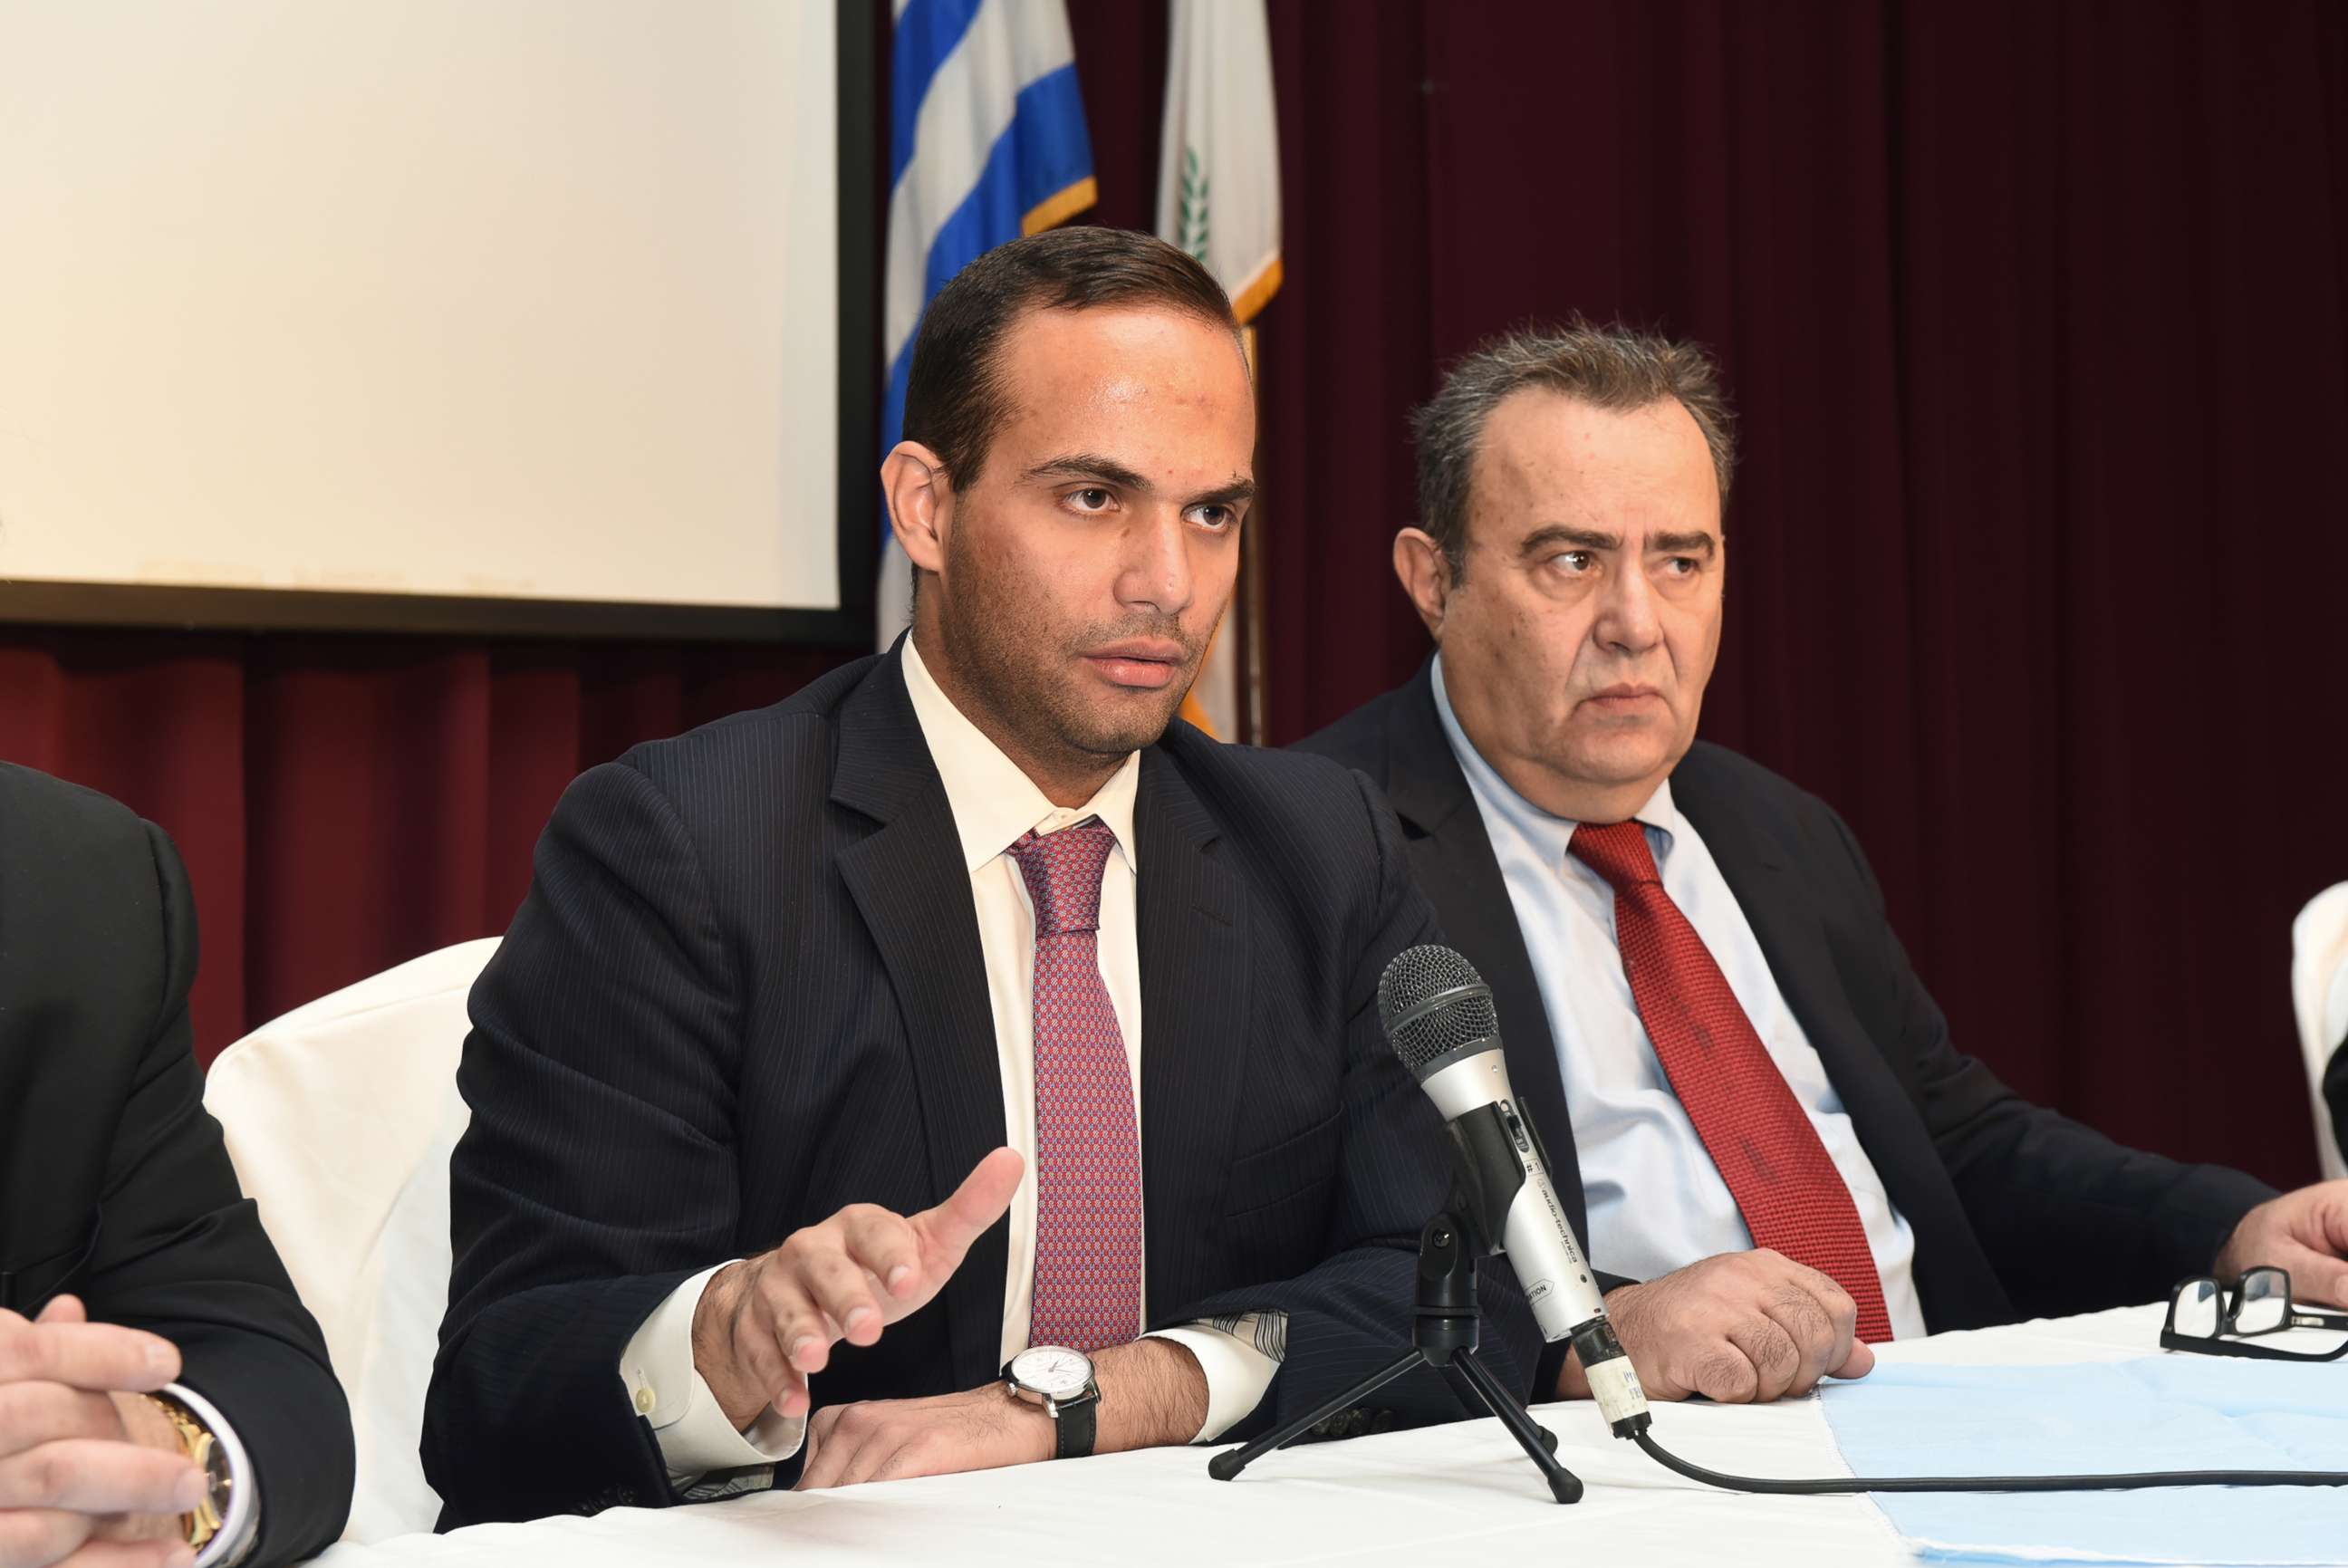 PHOTO: George Papadopoulos, left, speaks at an event in Astoria, N.Y., Nov. 6, 2016. At right is Dr. Michael Katehakis of Rutgers University.
